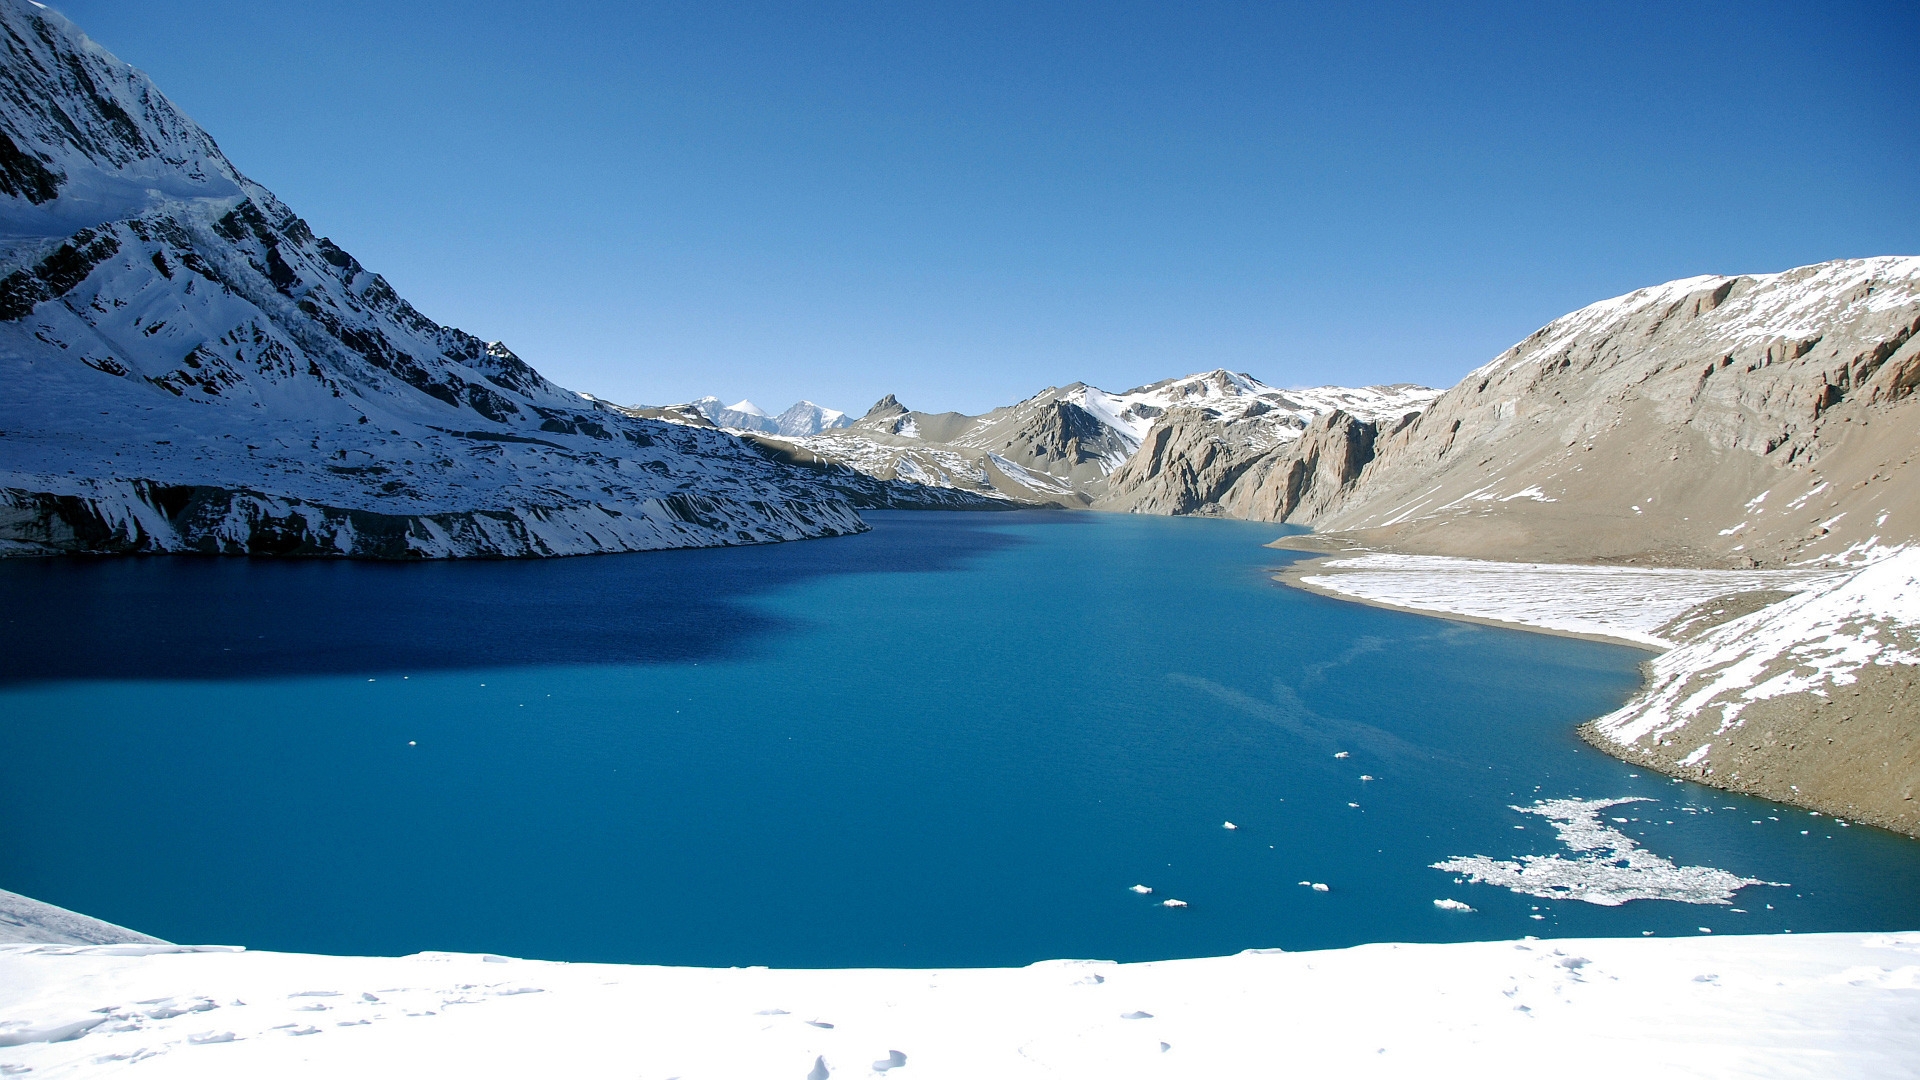 Tilicho Lake View for 1920 x 1080 HDTV 1080p resolution